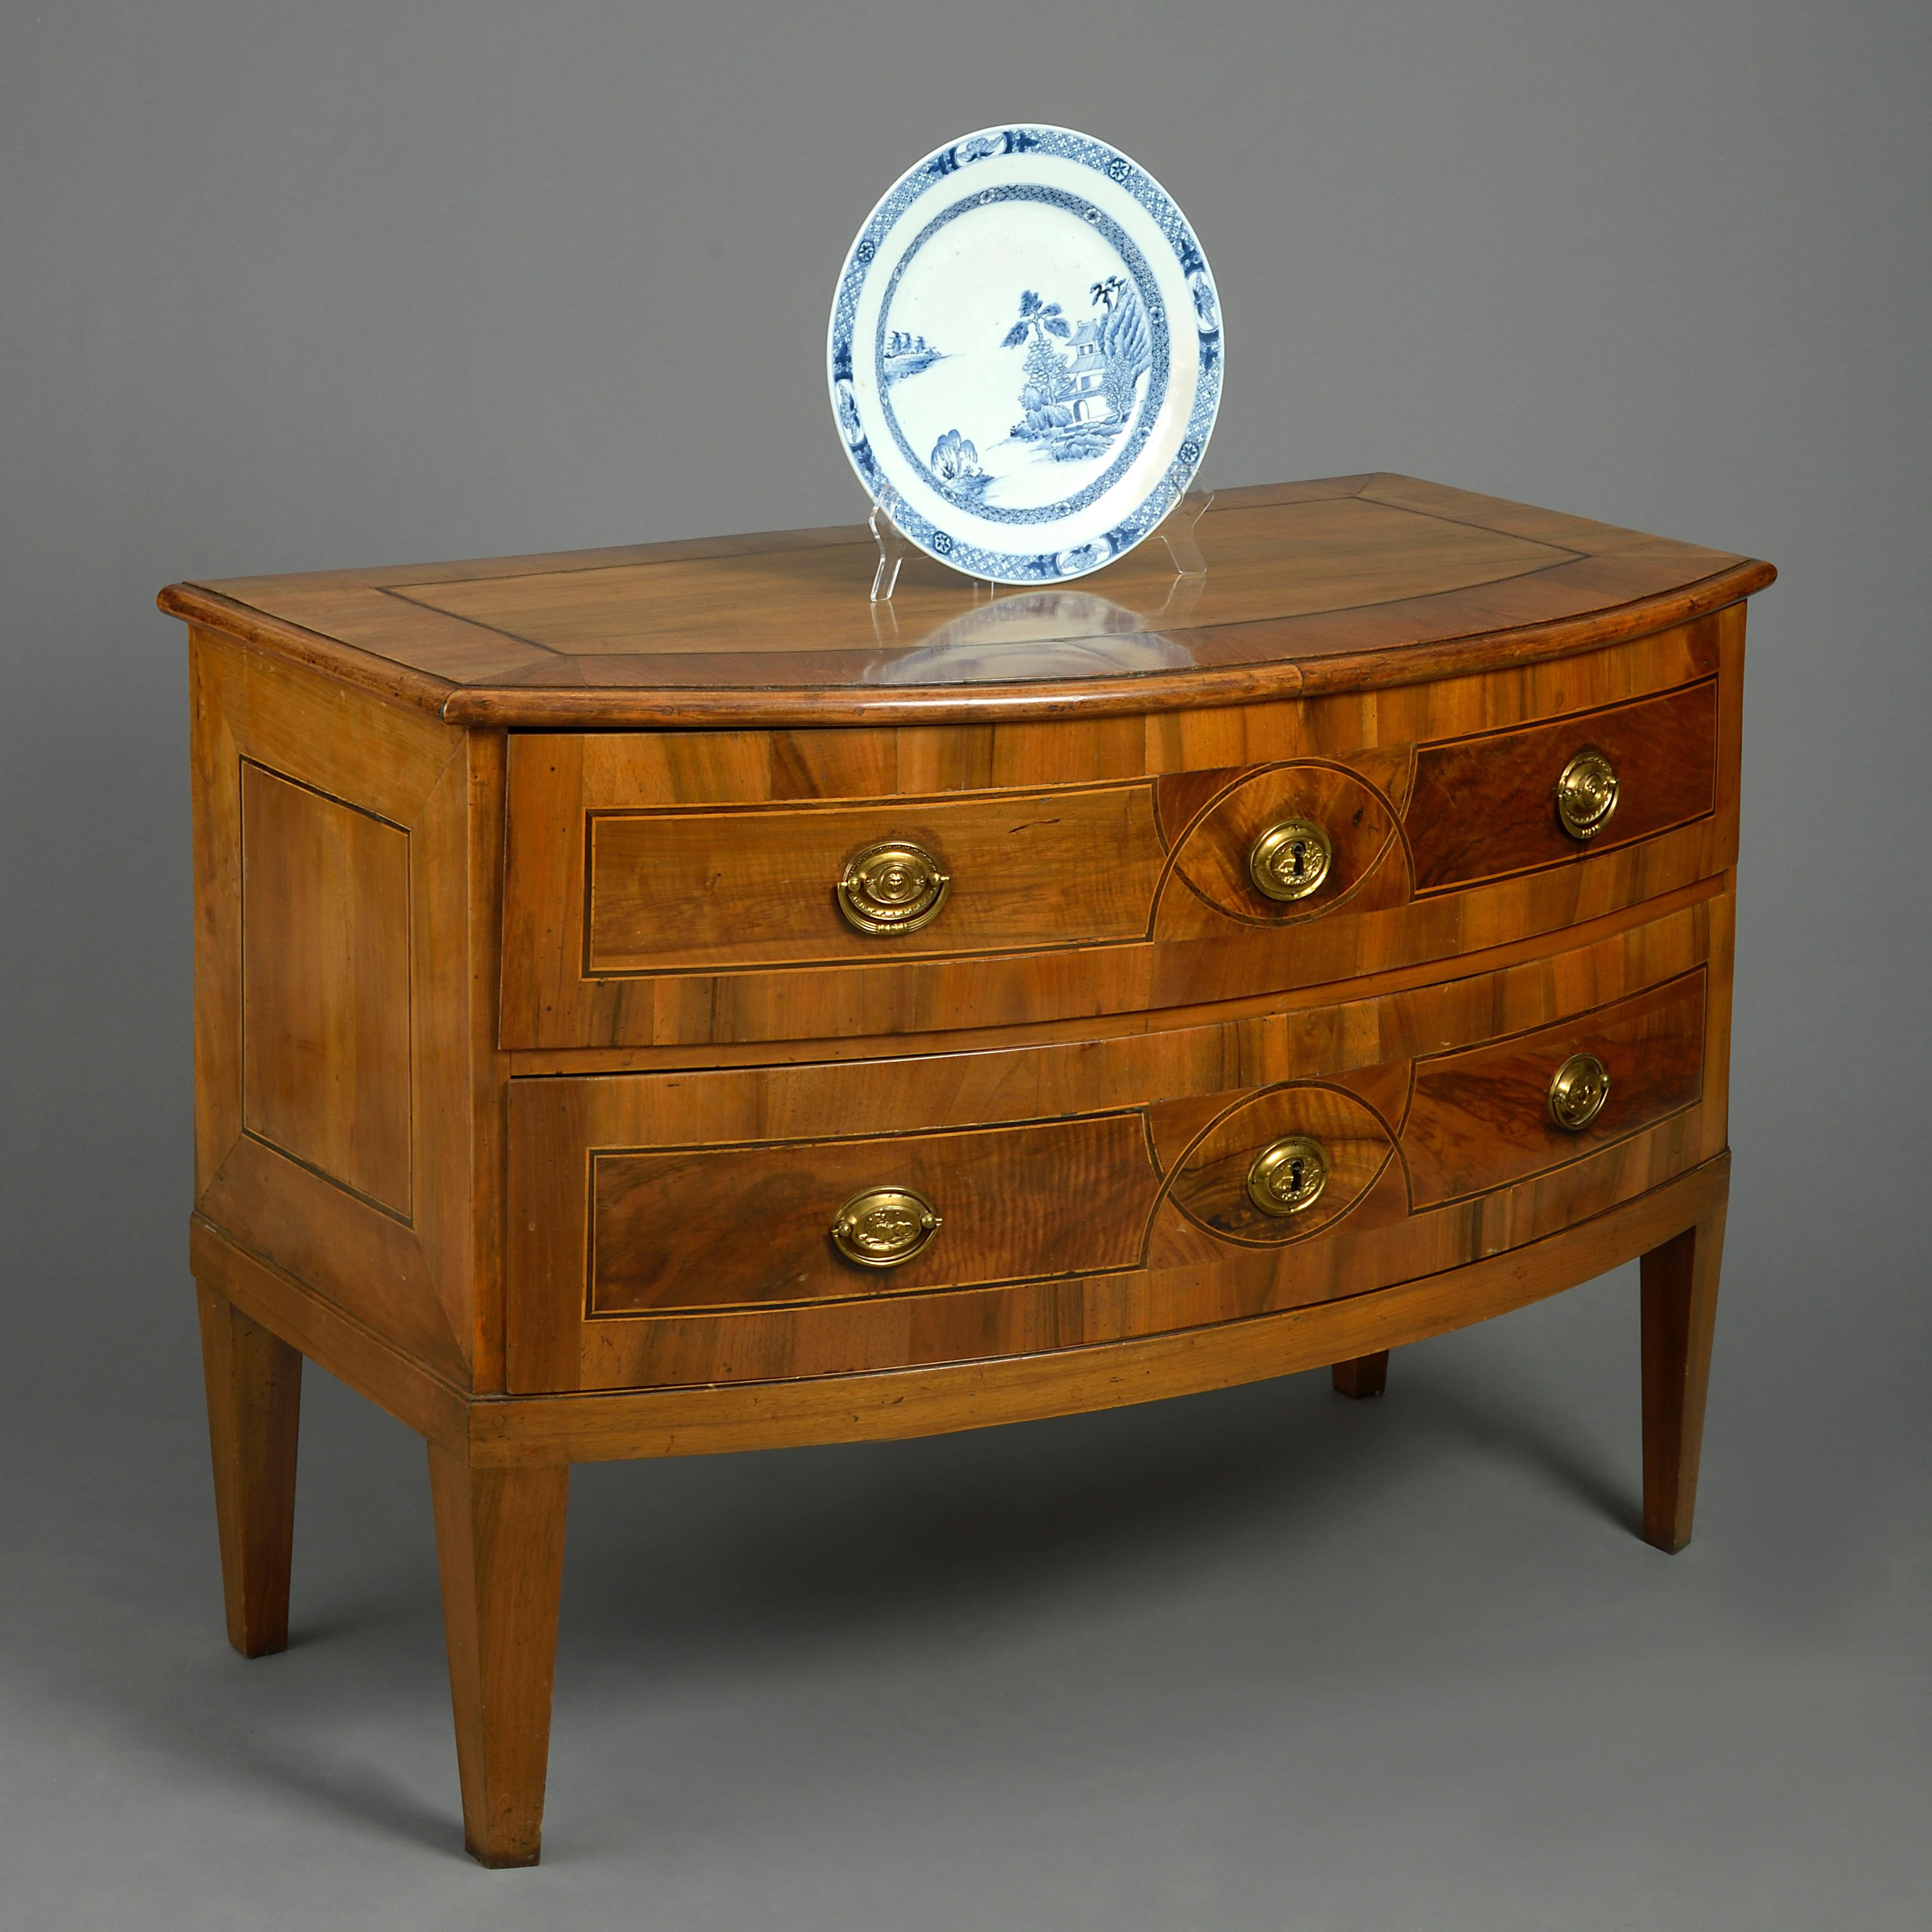 A fine late 18th century bow front commode in the neoclassical taste, the overhanging cross-banded top with ebony and boxwood stringing above two long drawers of the same, with oval brass handles and lock escutcheons, all raised on square tapering